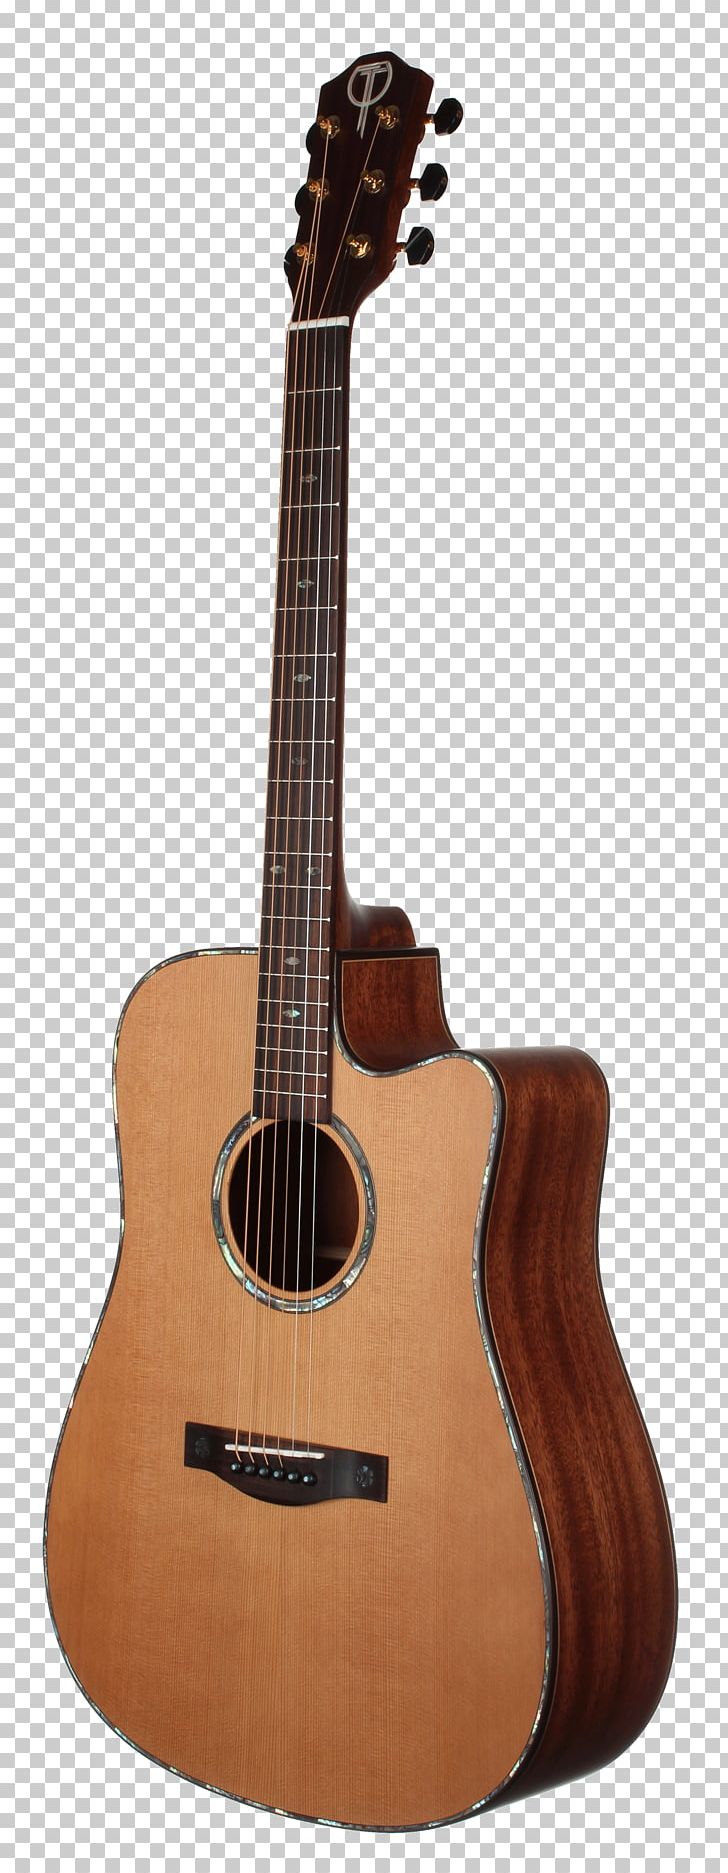 Acoustic Guitar Tiple Acoustic-electric Guitar Cuatro PNG, Clipart, Acoustic Electric Guitar, Classical Guitar, Cuatro, Guitar, Guitar Accessory Free PNG Download